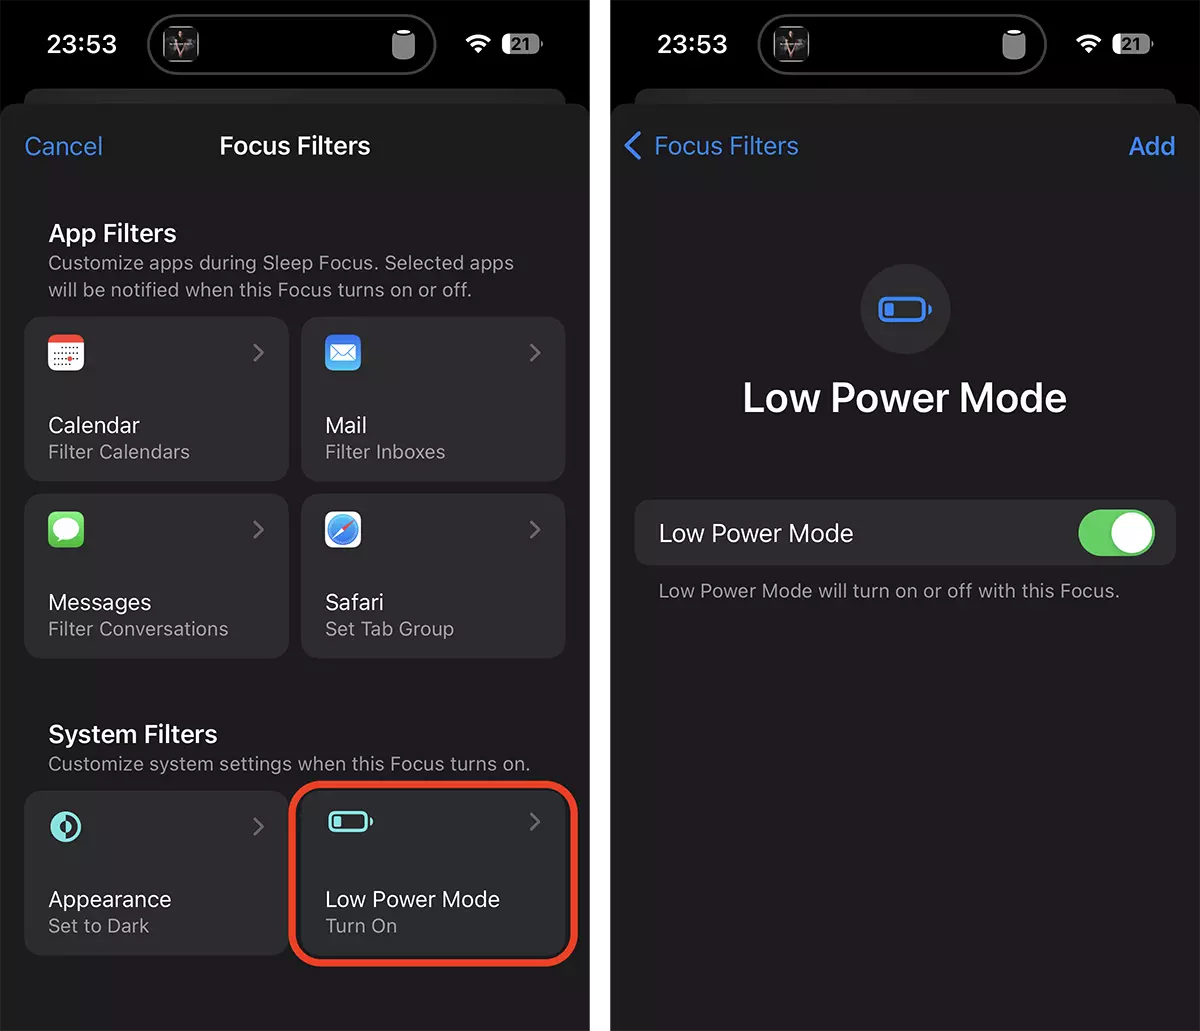 Systemfilter - Low Power Mode